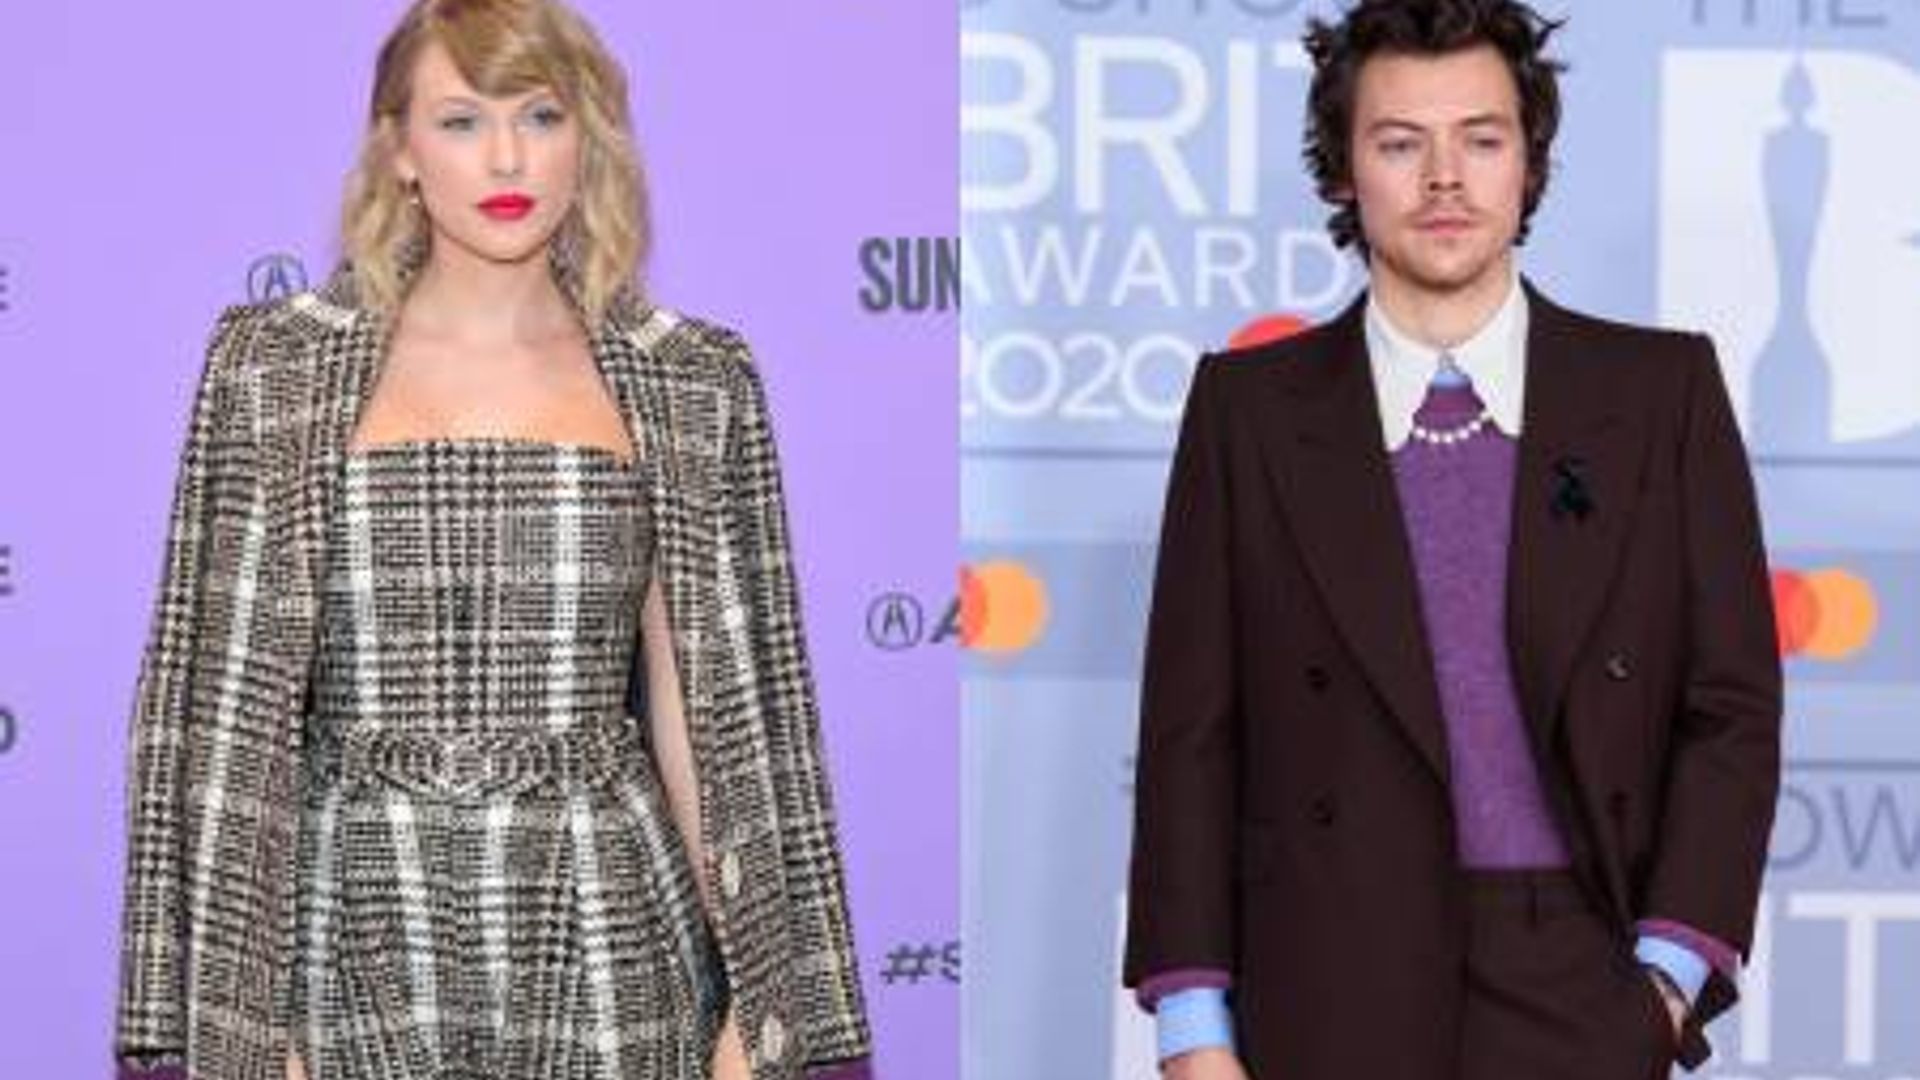 Taylor Swift and Harry Styles will take home Grammy’s 2021 official gift bag - and it’s beyond amazing